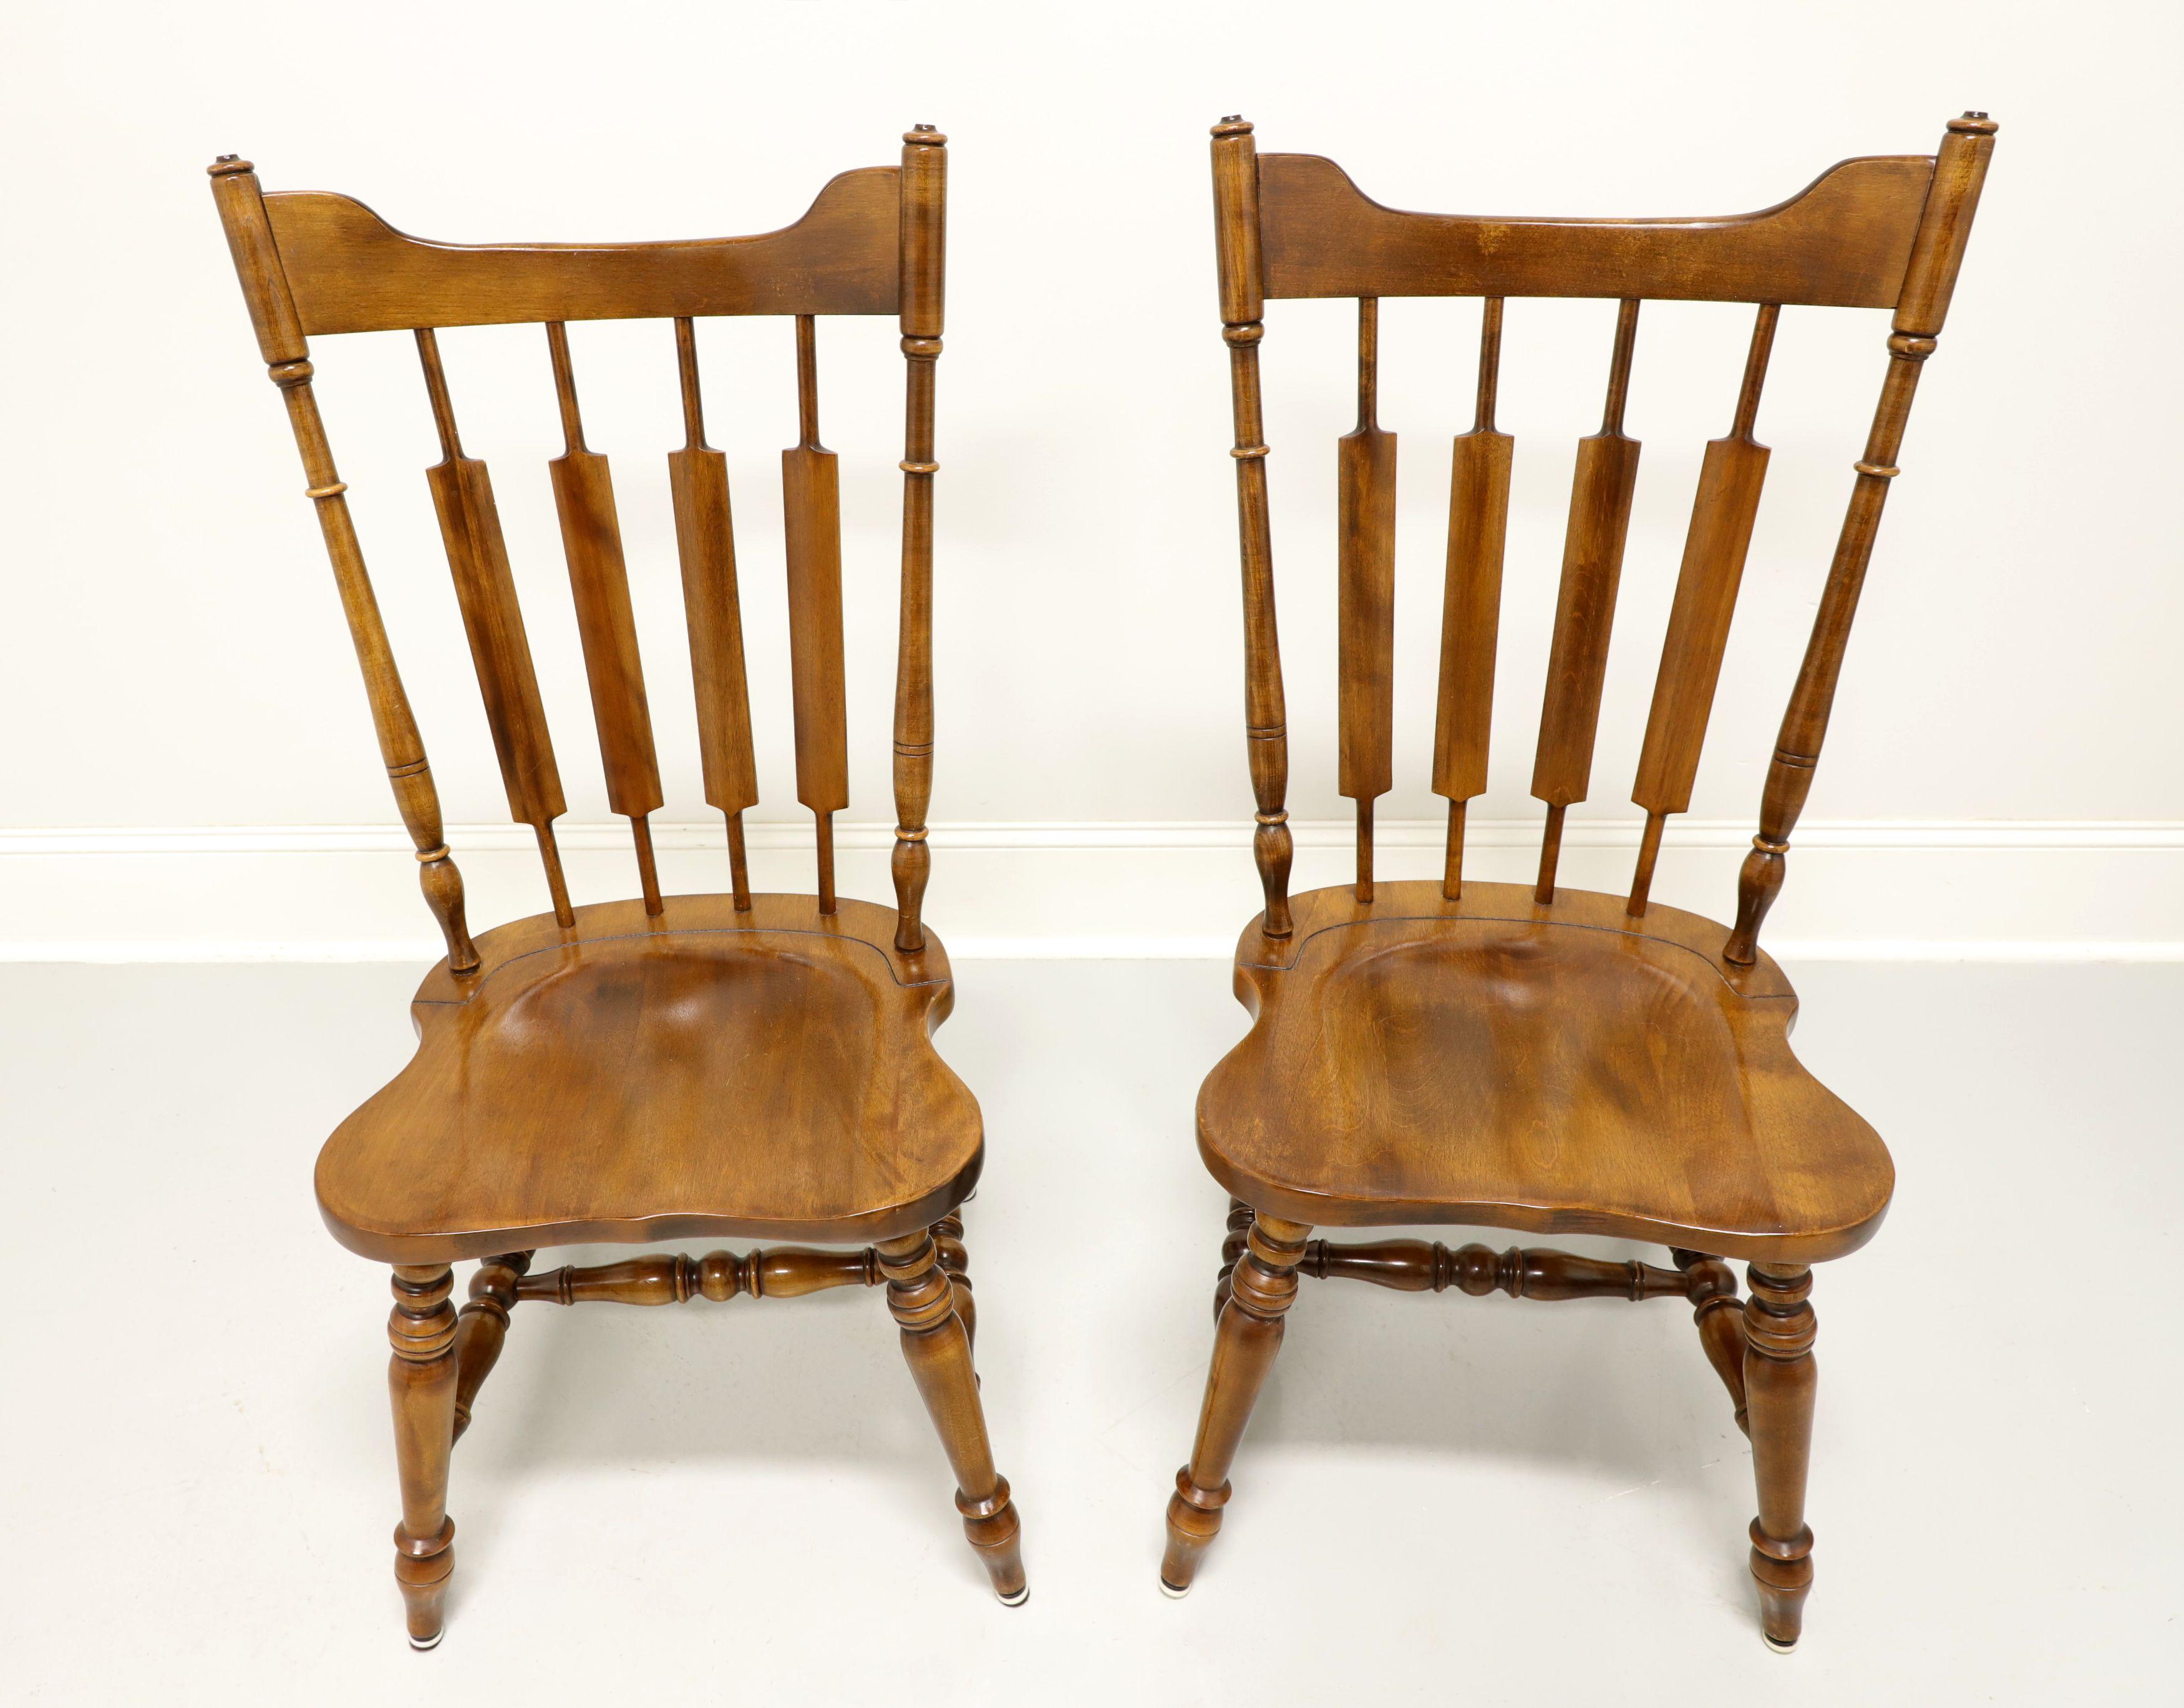 A pair of Early American Windsor style dining side chars by Temple Stuart, their 829 Rockingham. Solid maple with carved crestrail, cattail spindles backrest, saddle shape seat, turned legs and stretchers. Made in the USA, in the late 20th